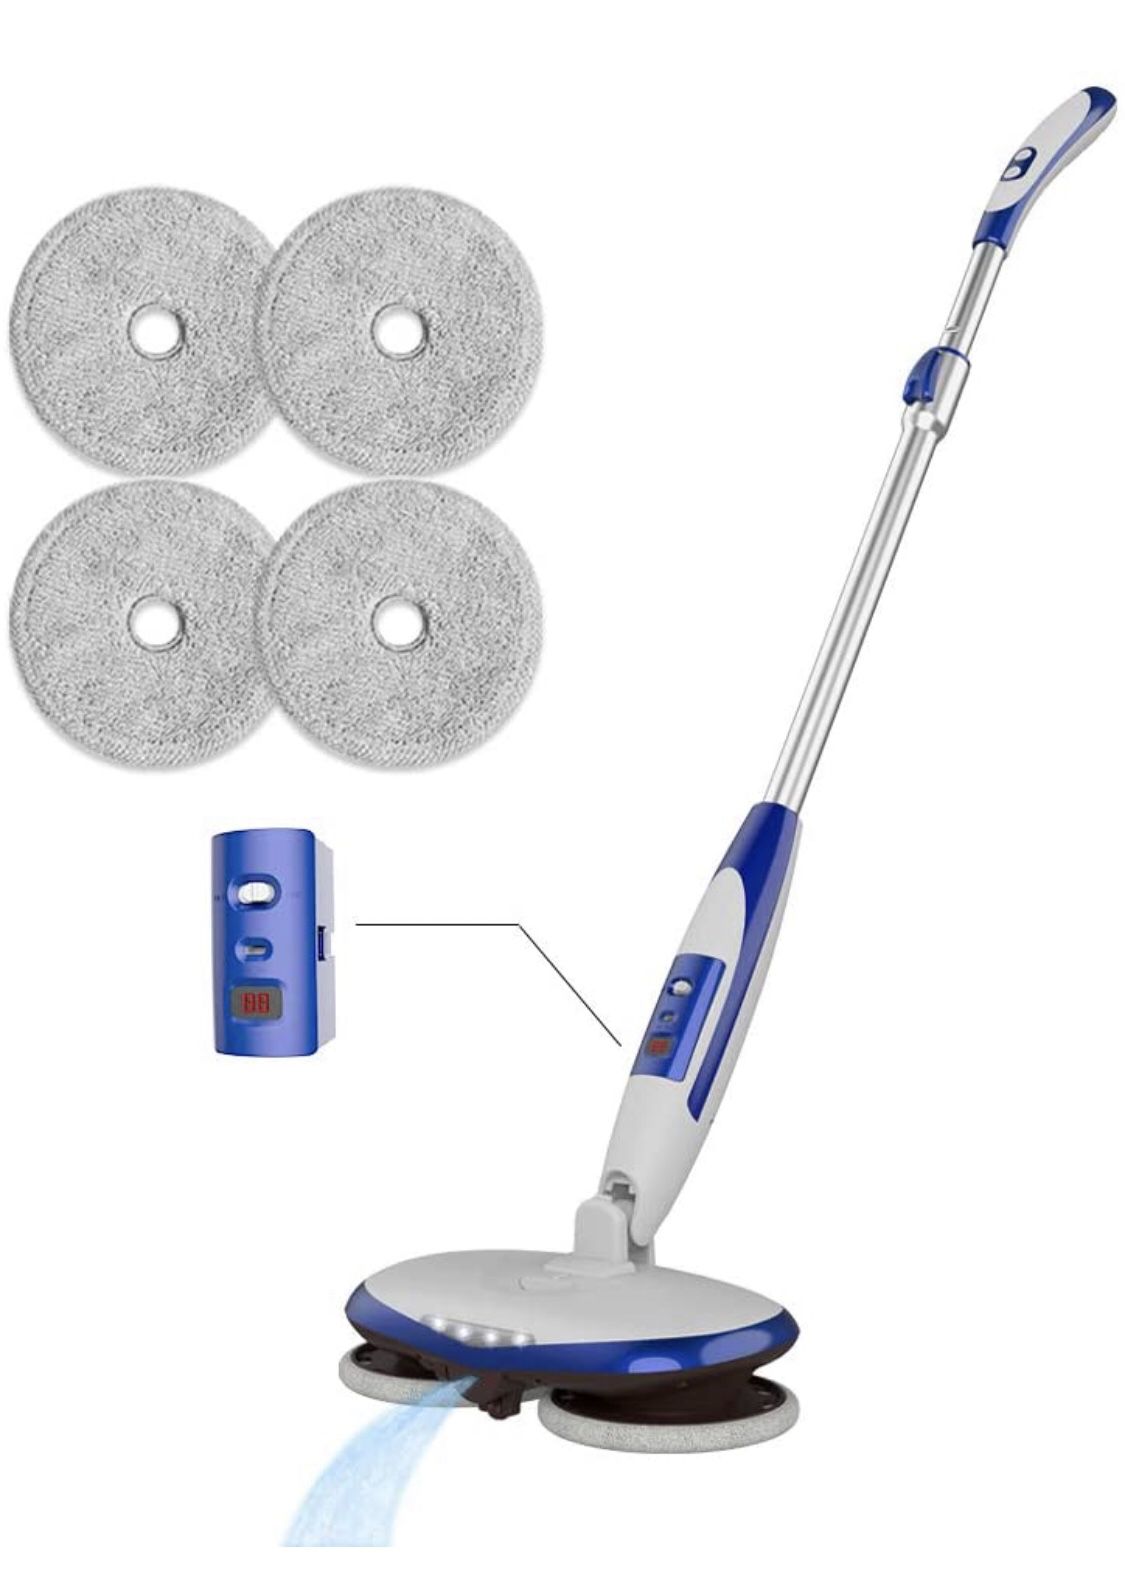 Cordless Electric Spin Mop, Floor Cleaner with Built-in 200ml Water Tank, Blue